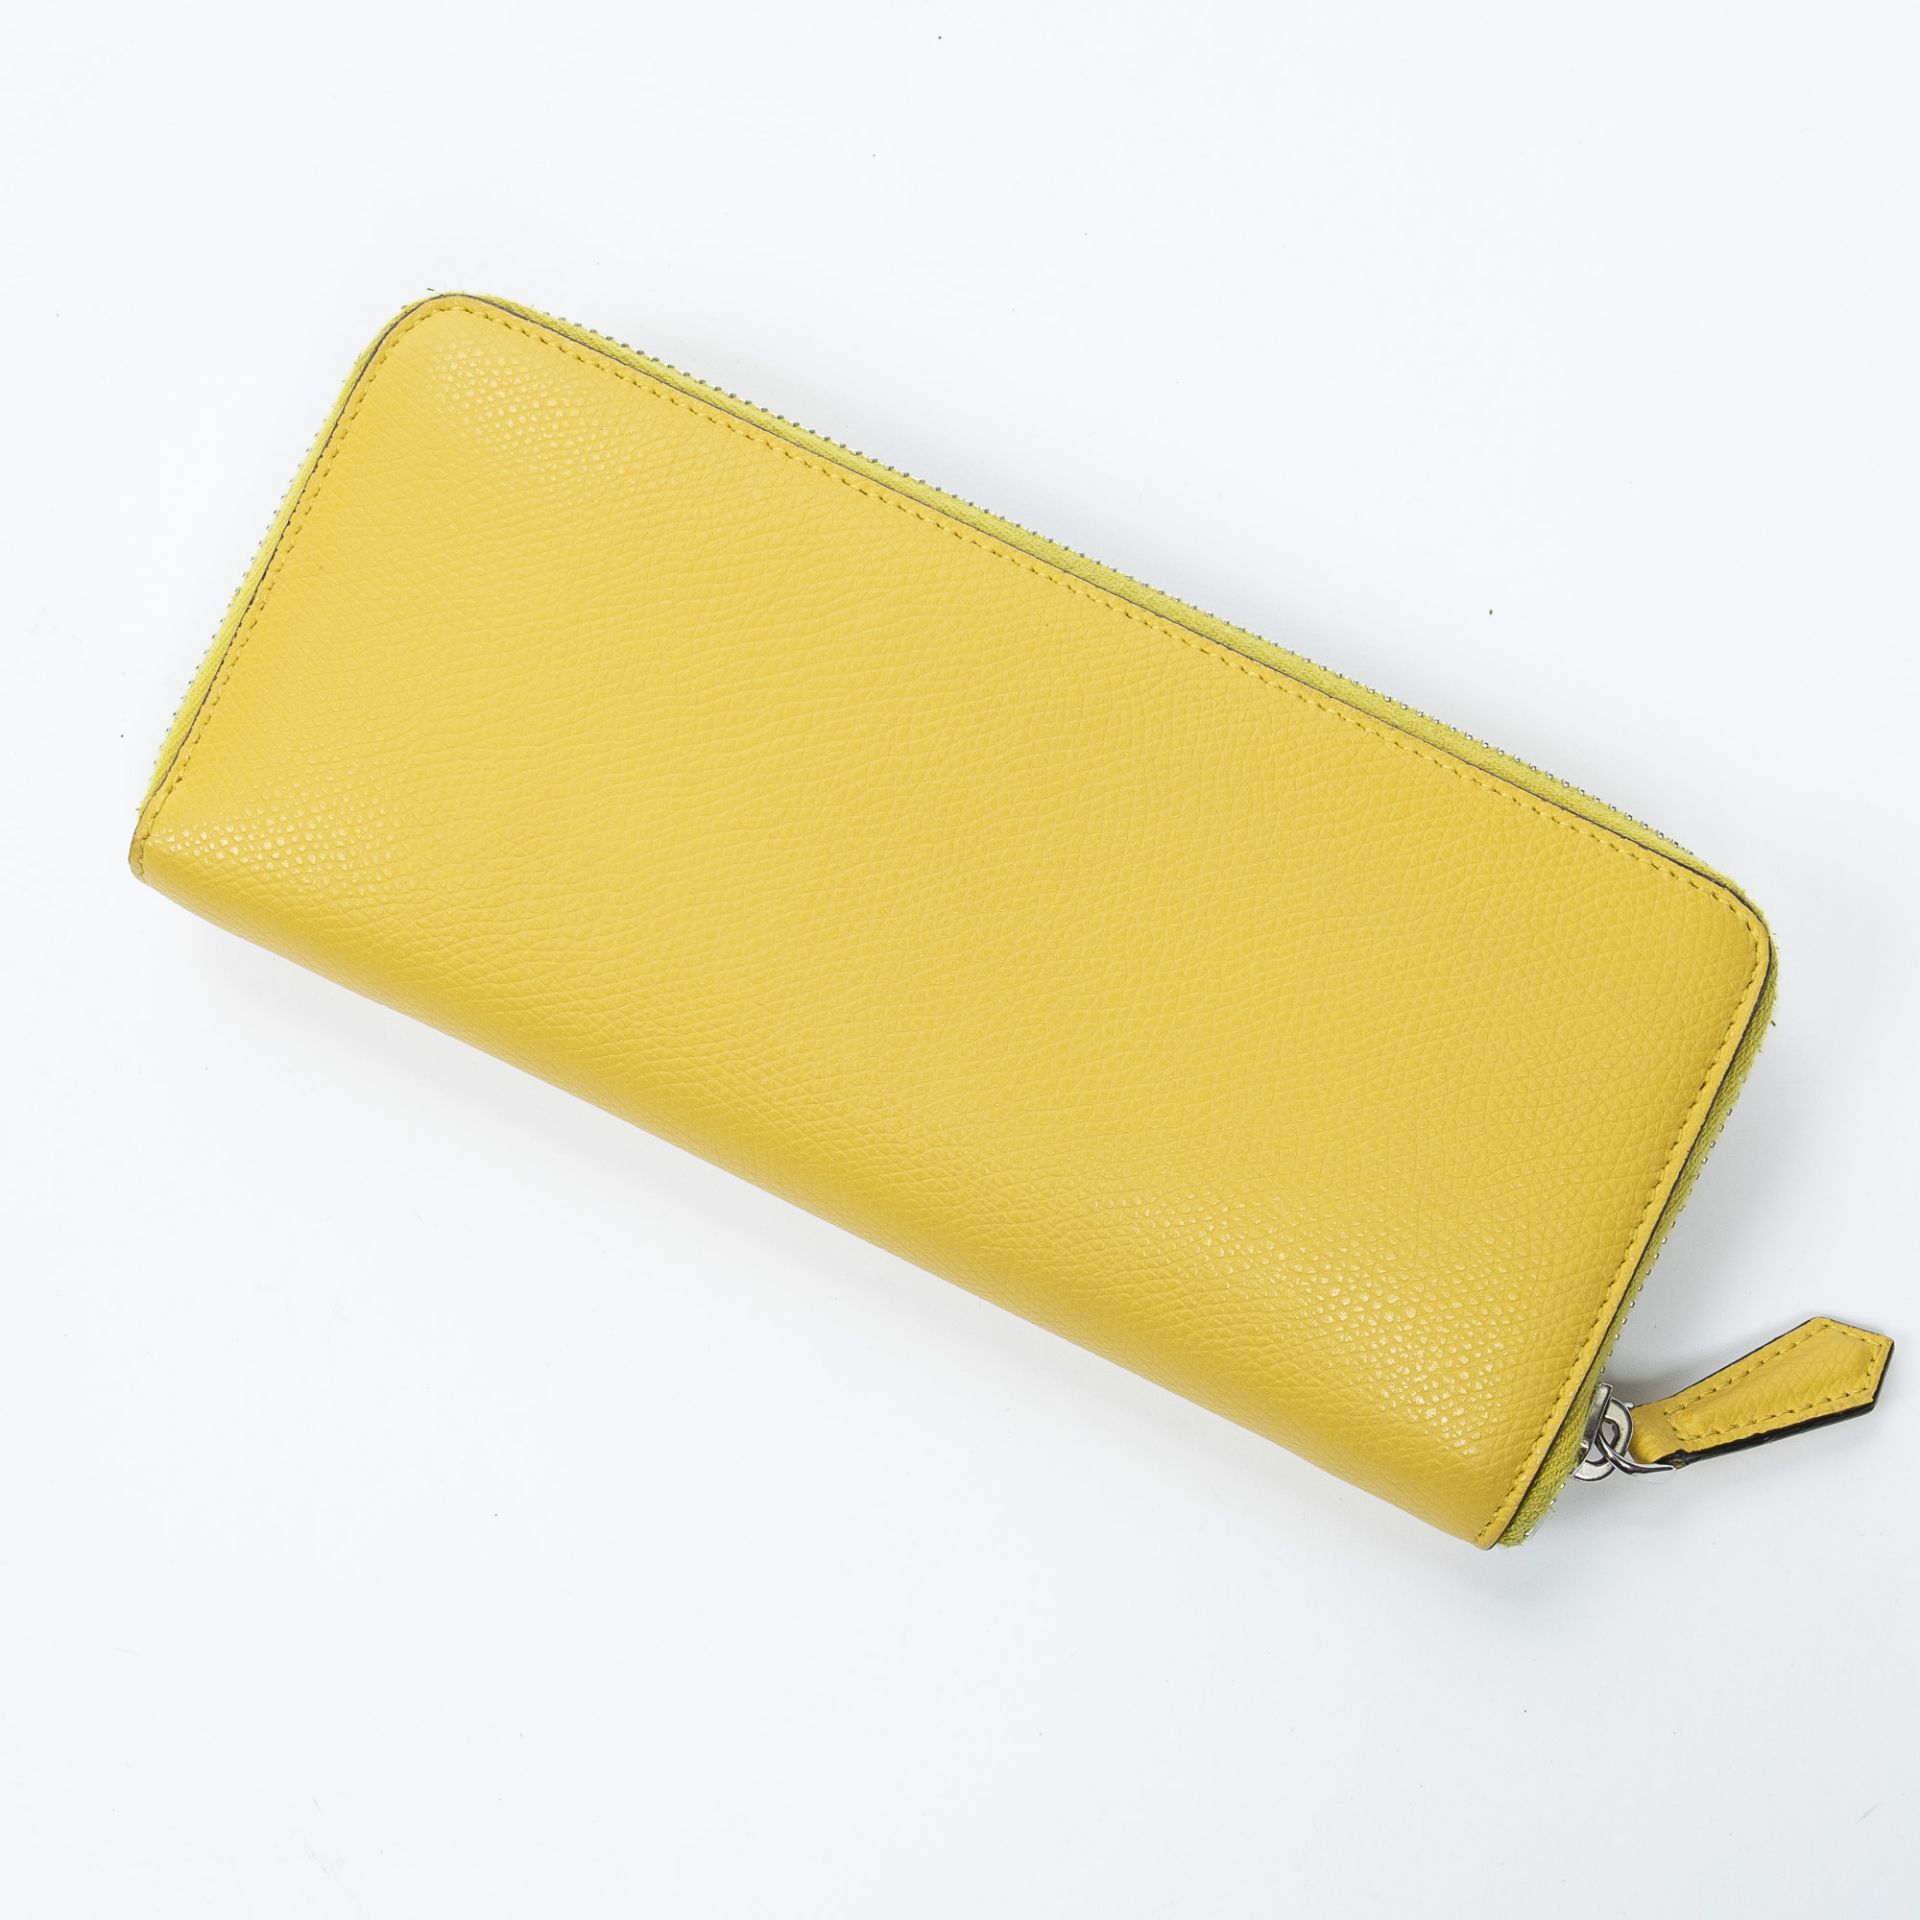 RRP £775.00 Lot To Contain 1 Fendi Calf Leather Slim Zip Around Wallet In Yellow - 20*9*2cm - A - - Image 2 of 3